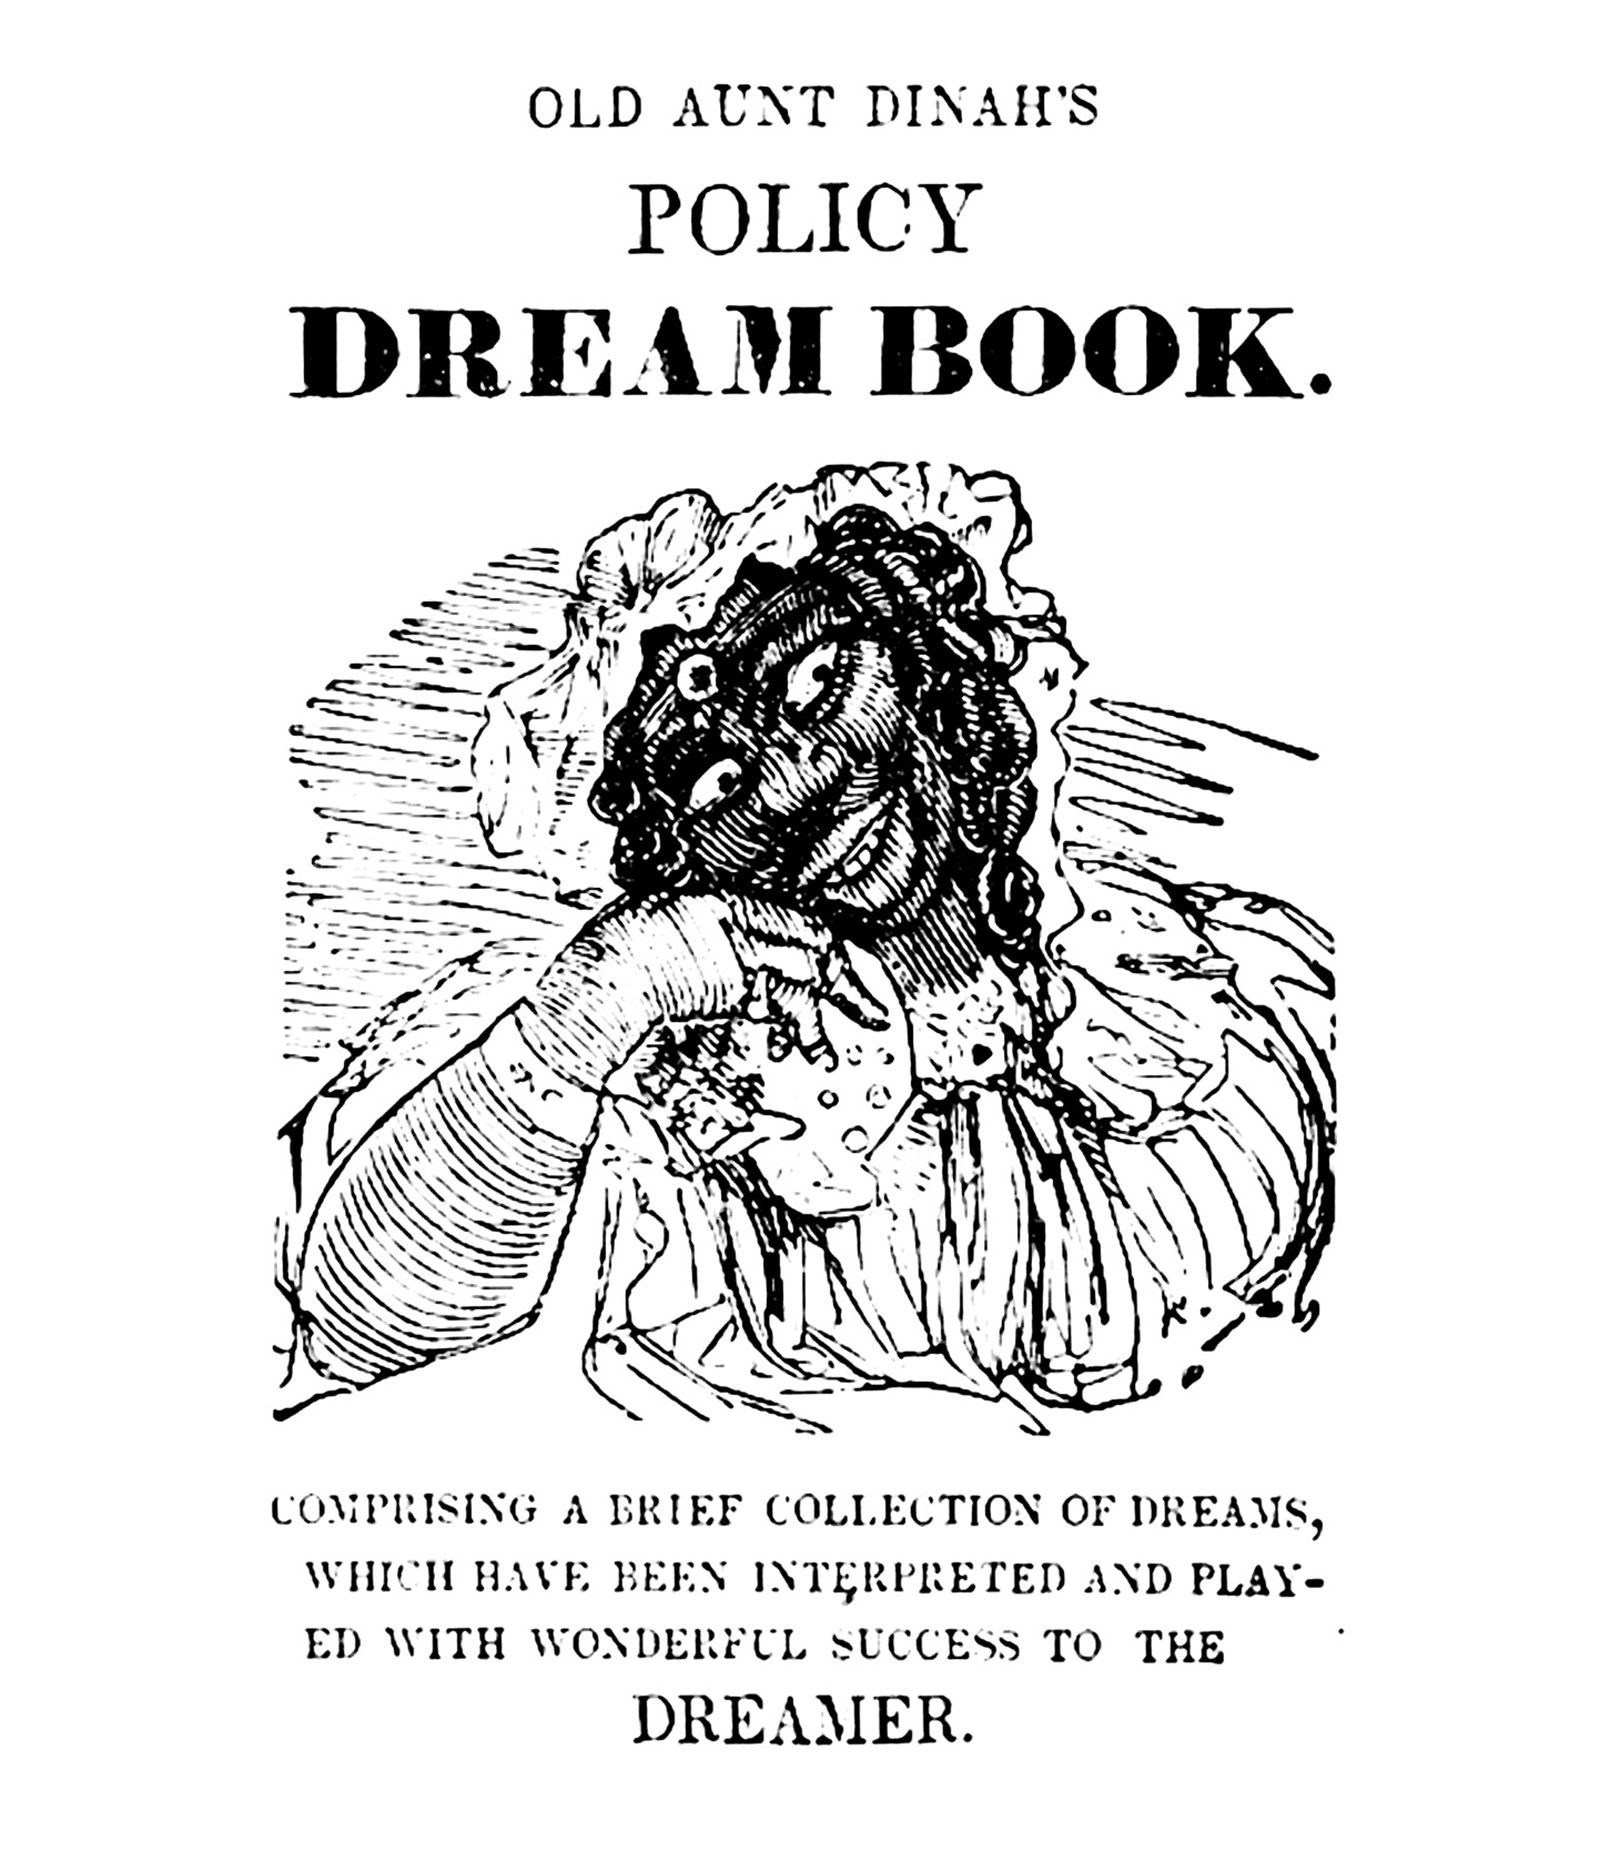 The title page of an eighteen fifty edition of “Old Aunt Dinah’s Policy Dream Book” depicting an illustration of a racist caricature.